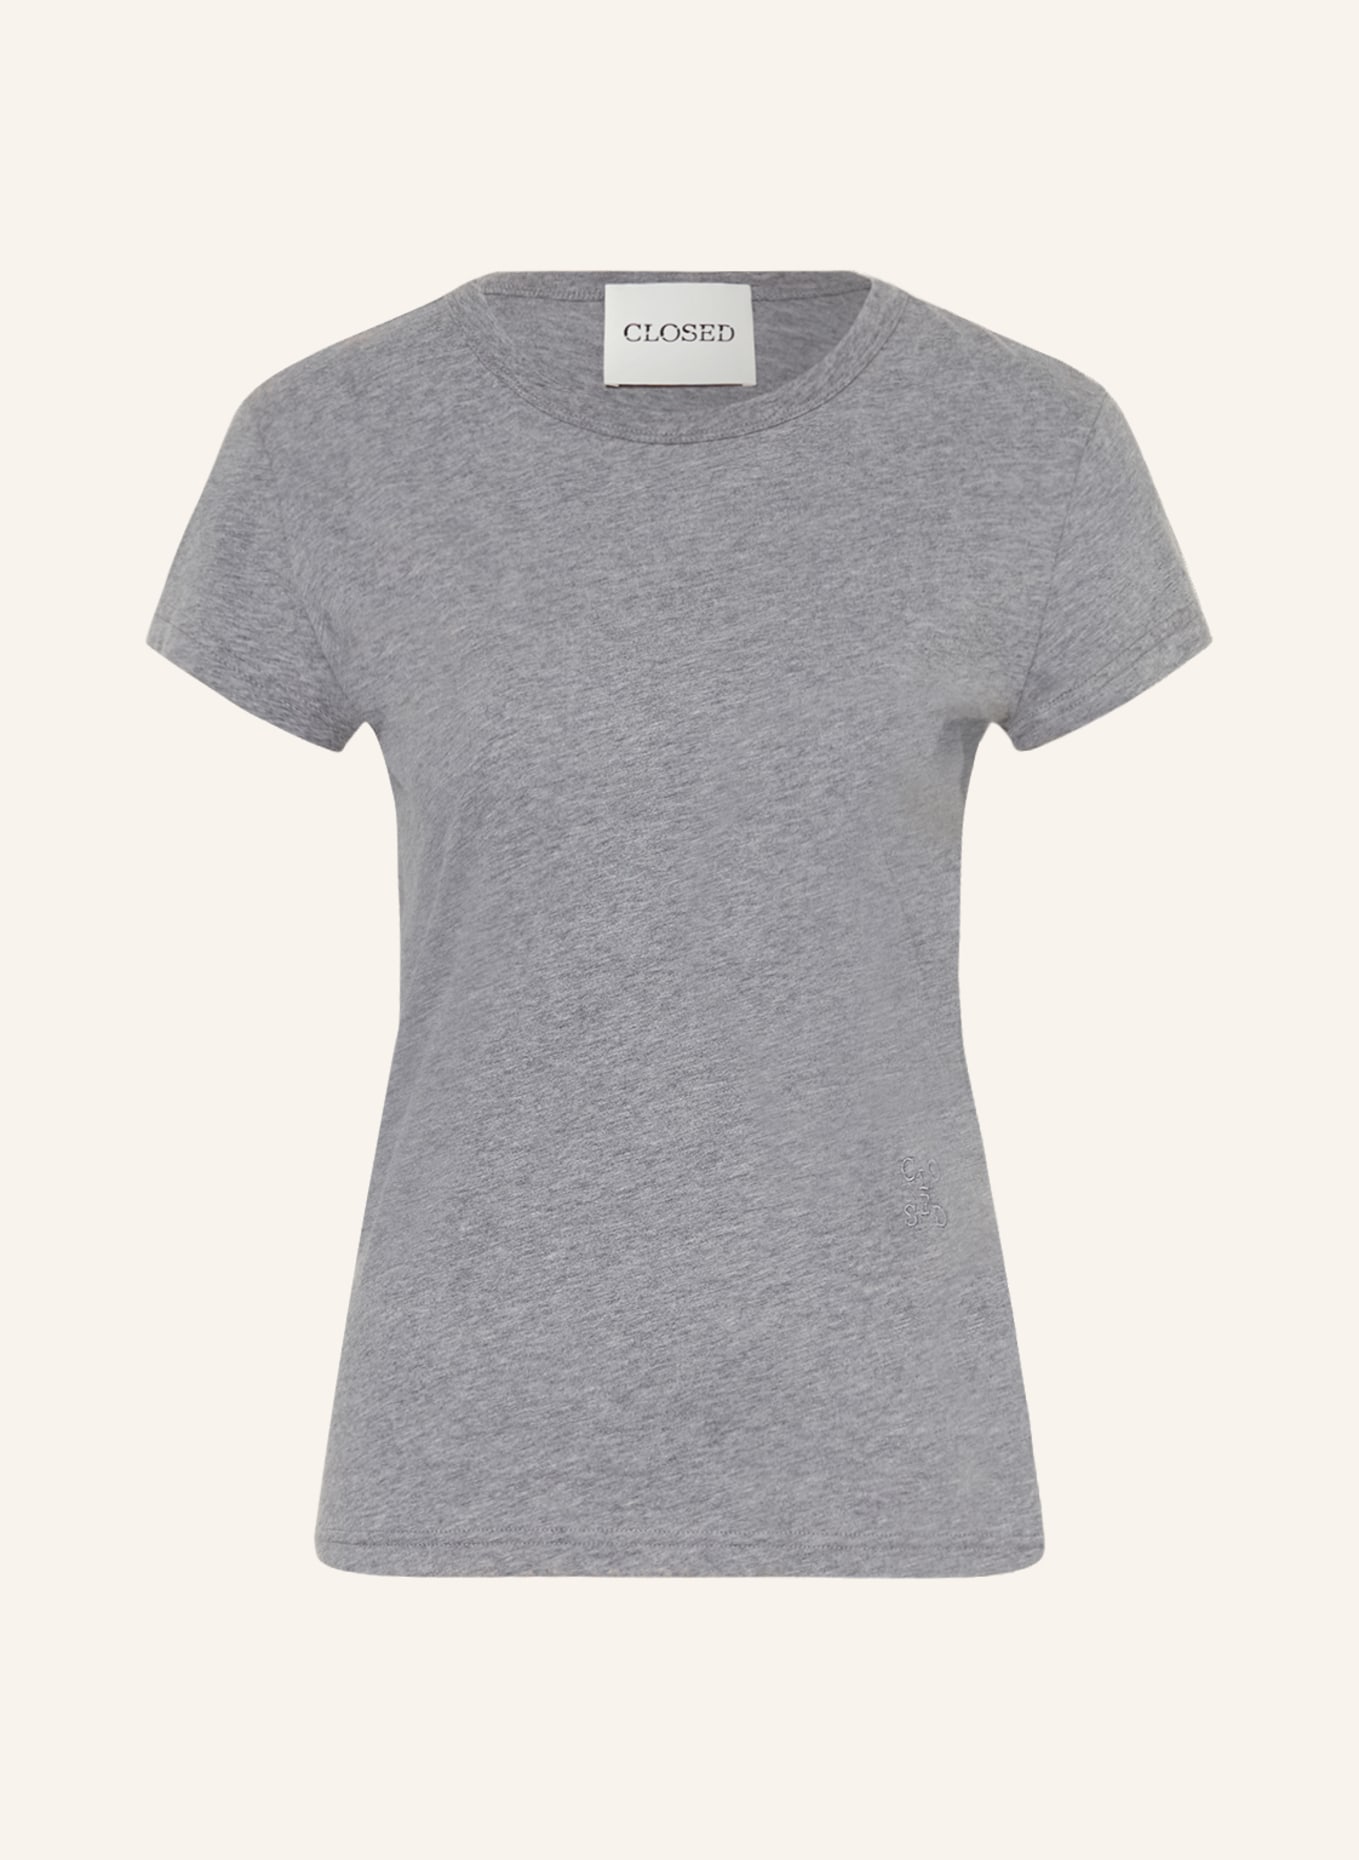 CLOSED T-shirt, Color: GRAY (Image 1)